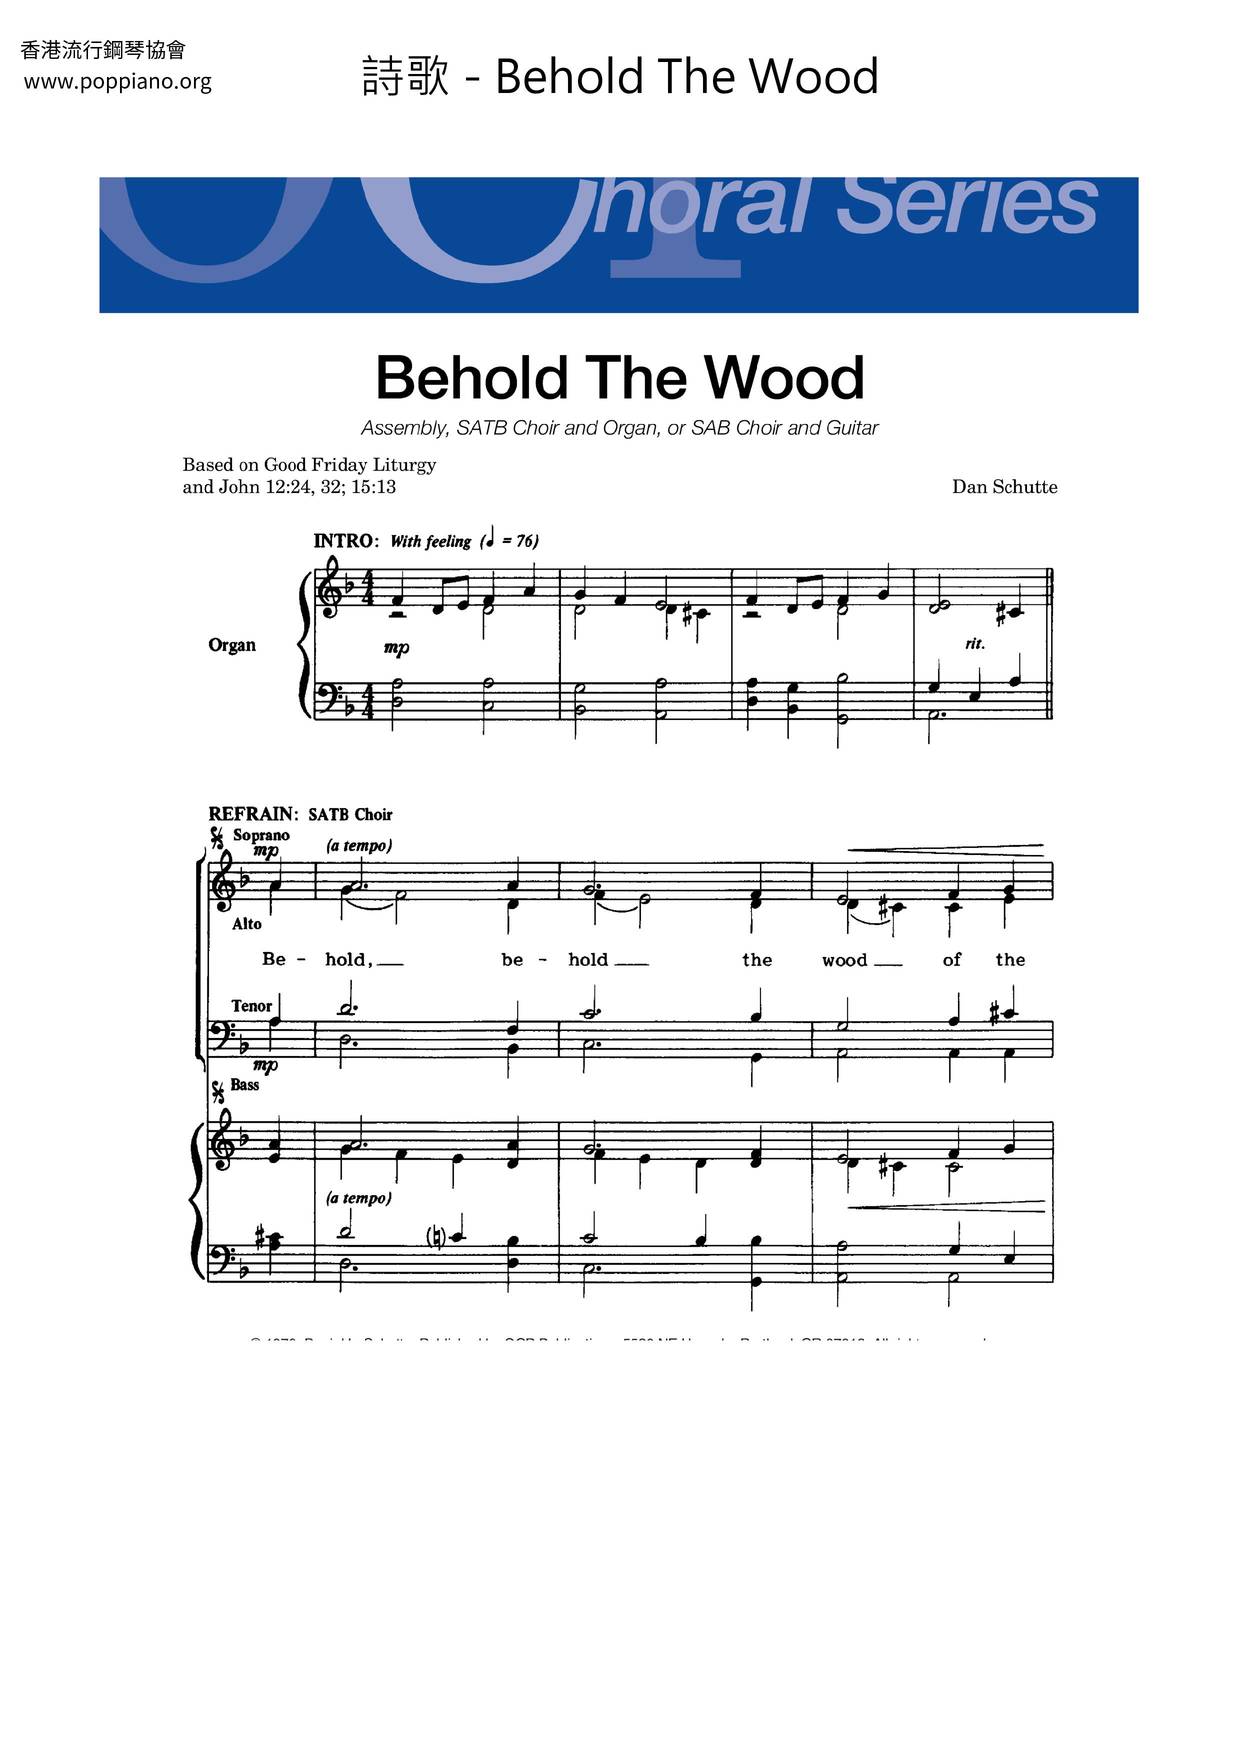 Behold The Wood Score